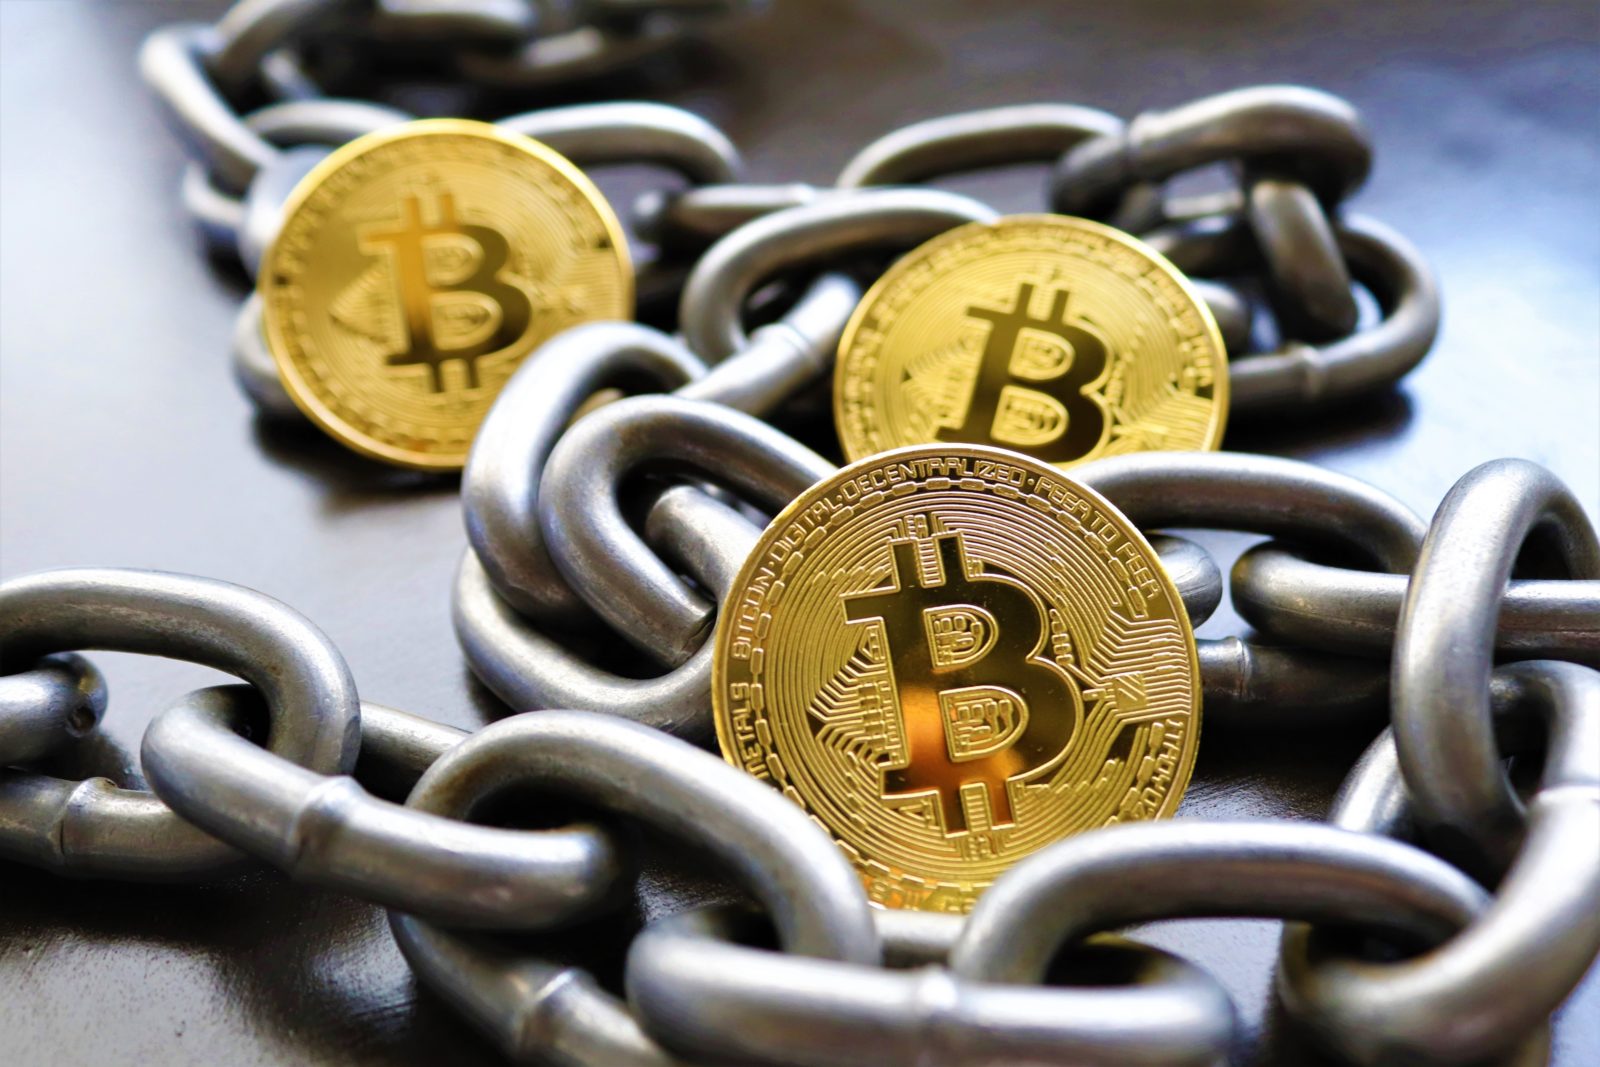 regulating cryptocurrency needn't kill the bitcoin buzz | kaspersky fraud prevention